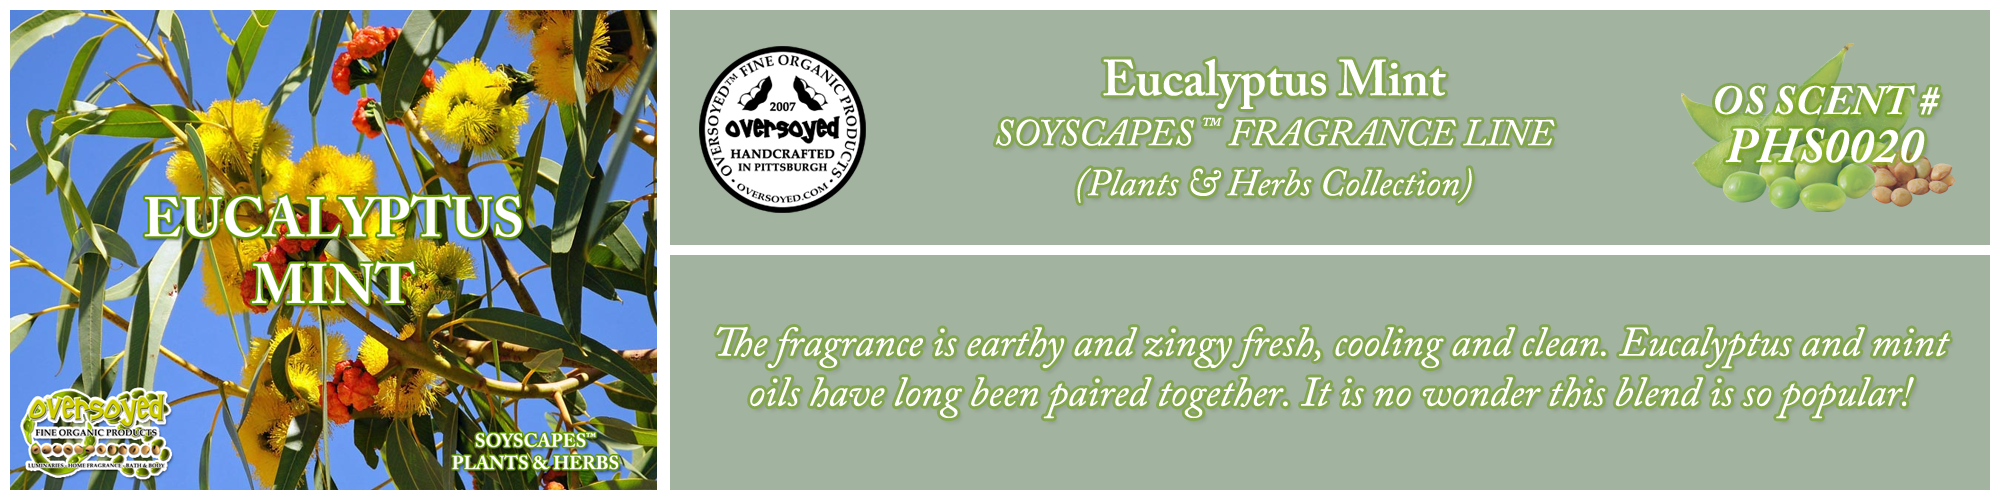 Eucalyptus Mint Handcrafted Products Collection